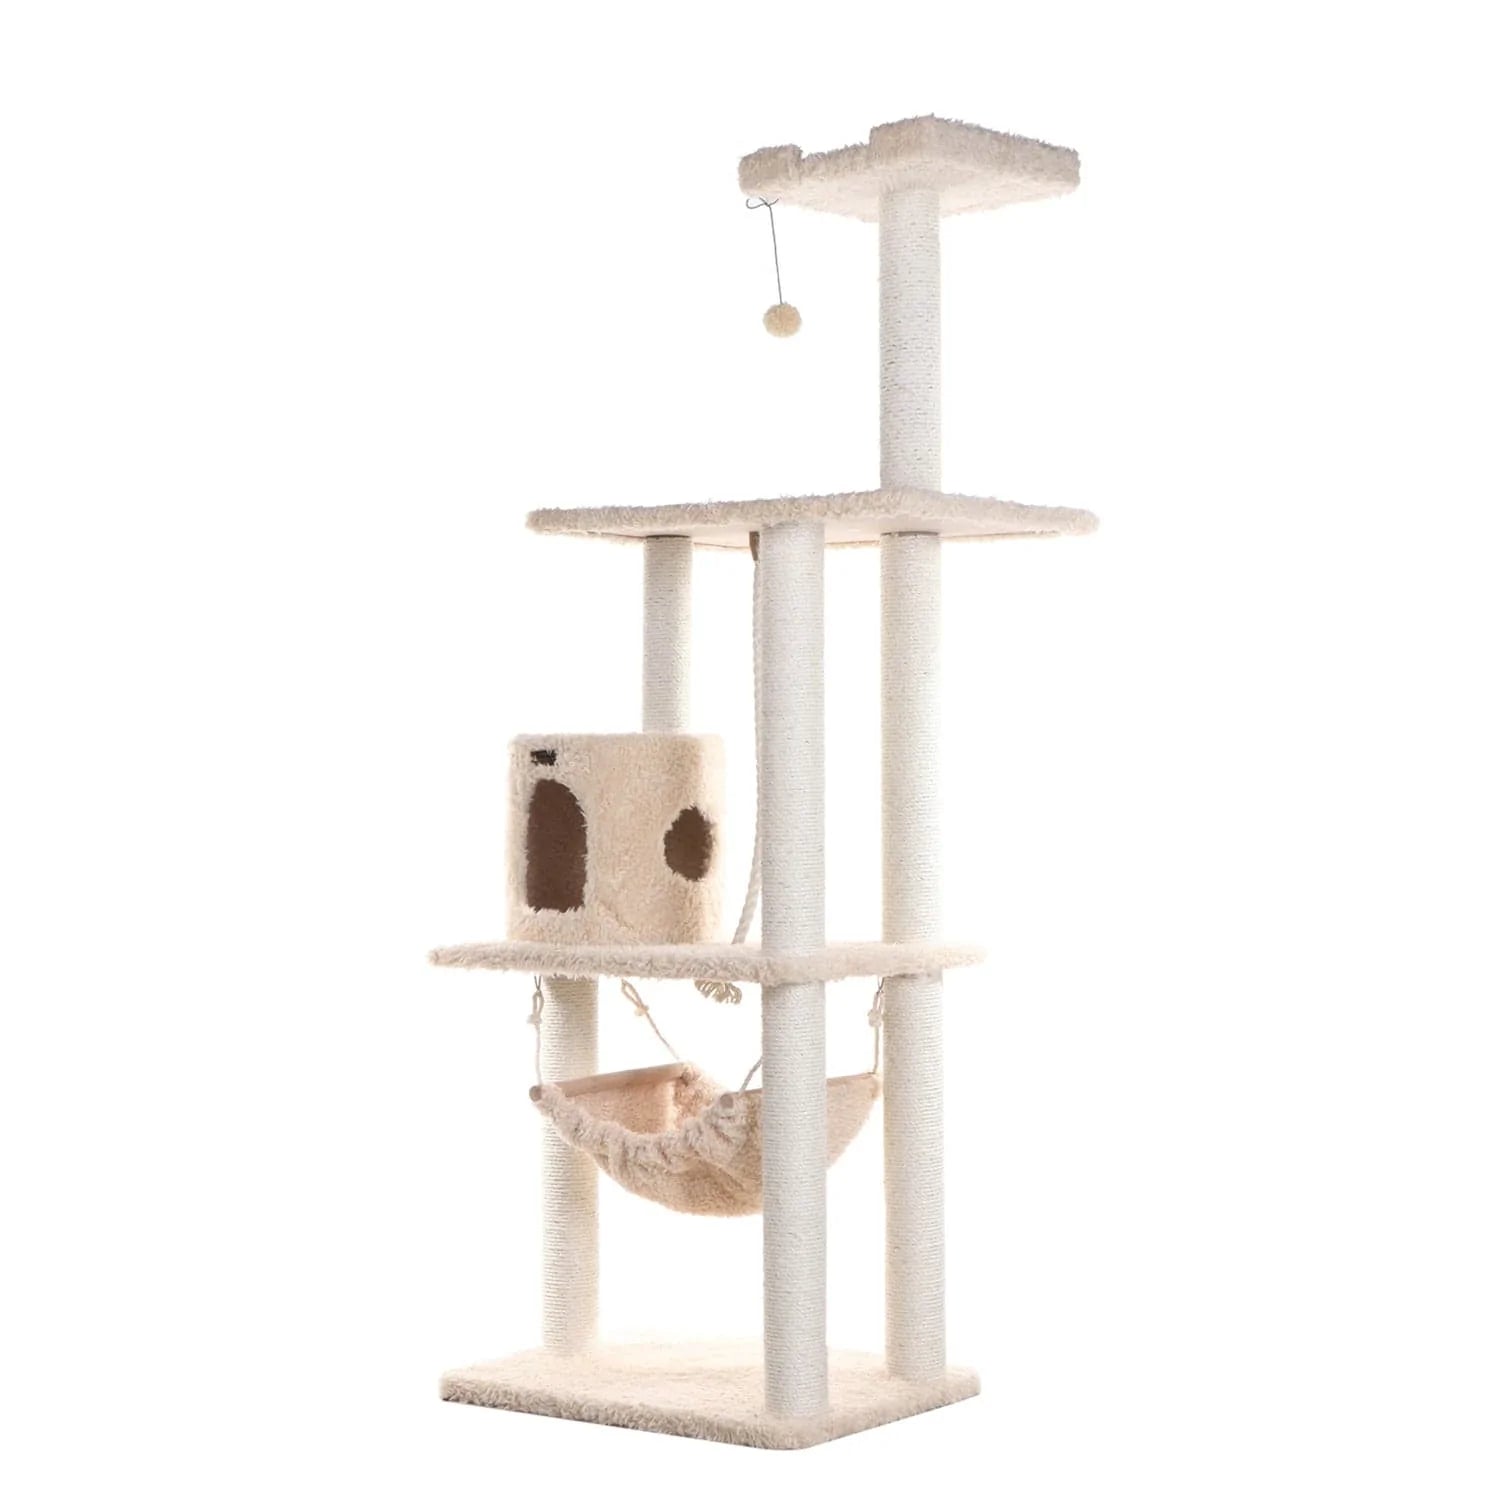 Armarkat 70-In Real Wood Cat Furniture,Ultra Thick Faux Fur Covered Cat Condo House A7005, Beige